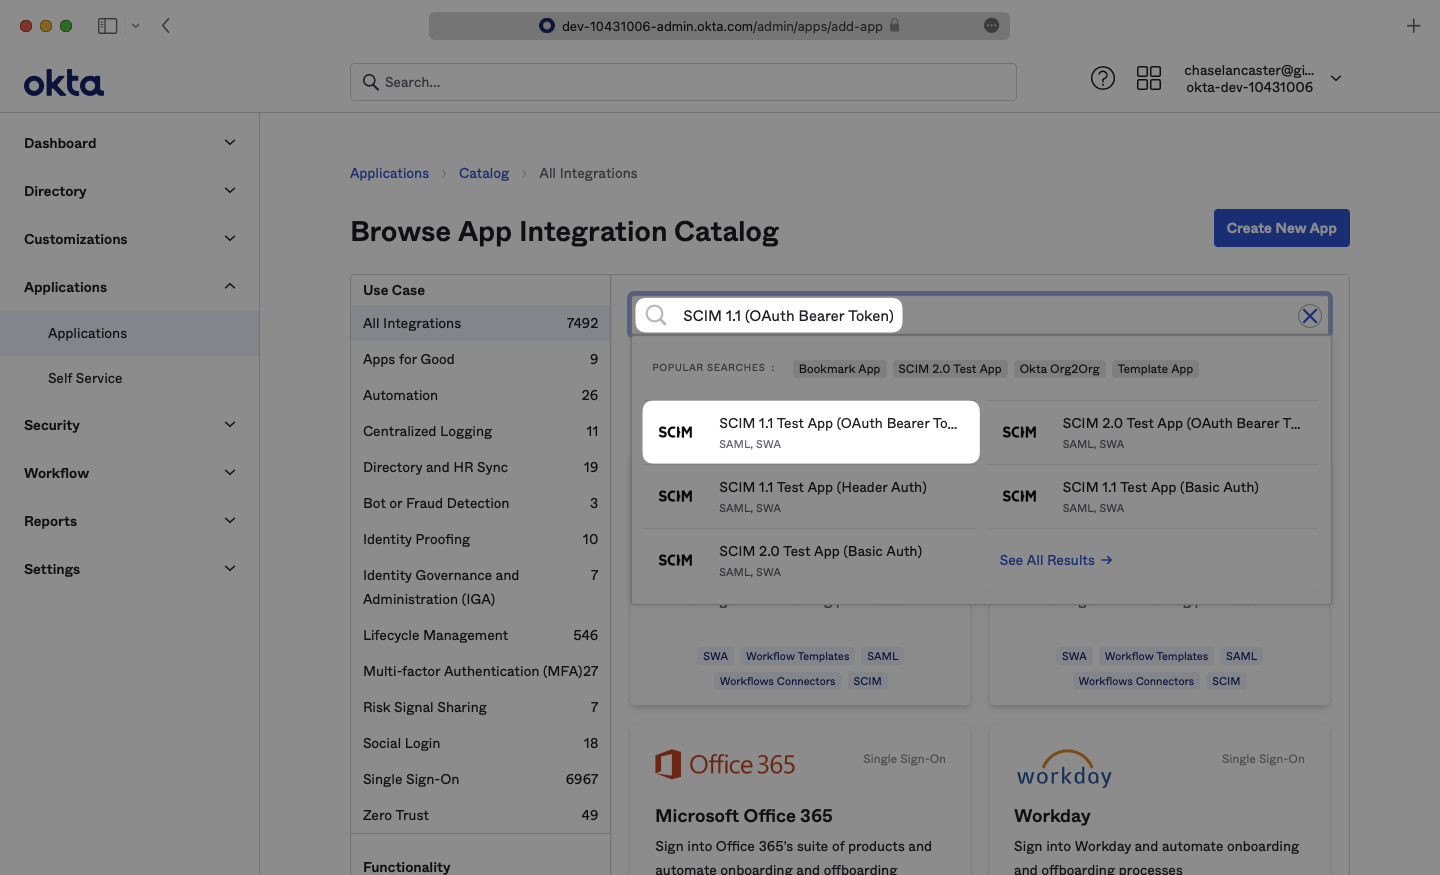 A screenshot showing where to search for "SCIM 1.1 Test App (OAuth Bearer Token)" in the App Integration Catalog in Okta.